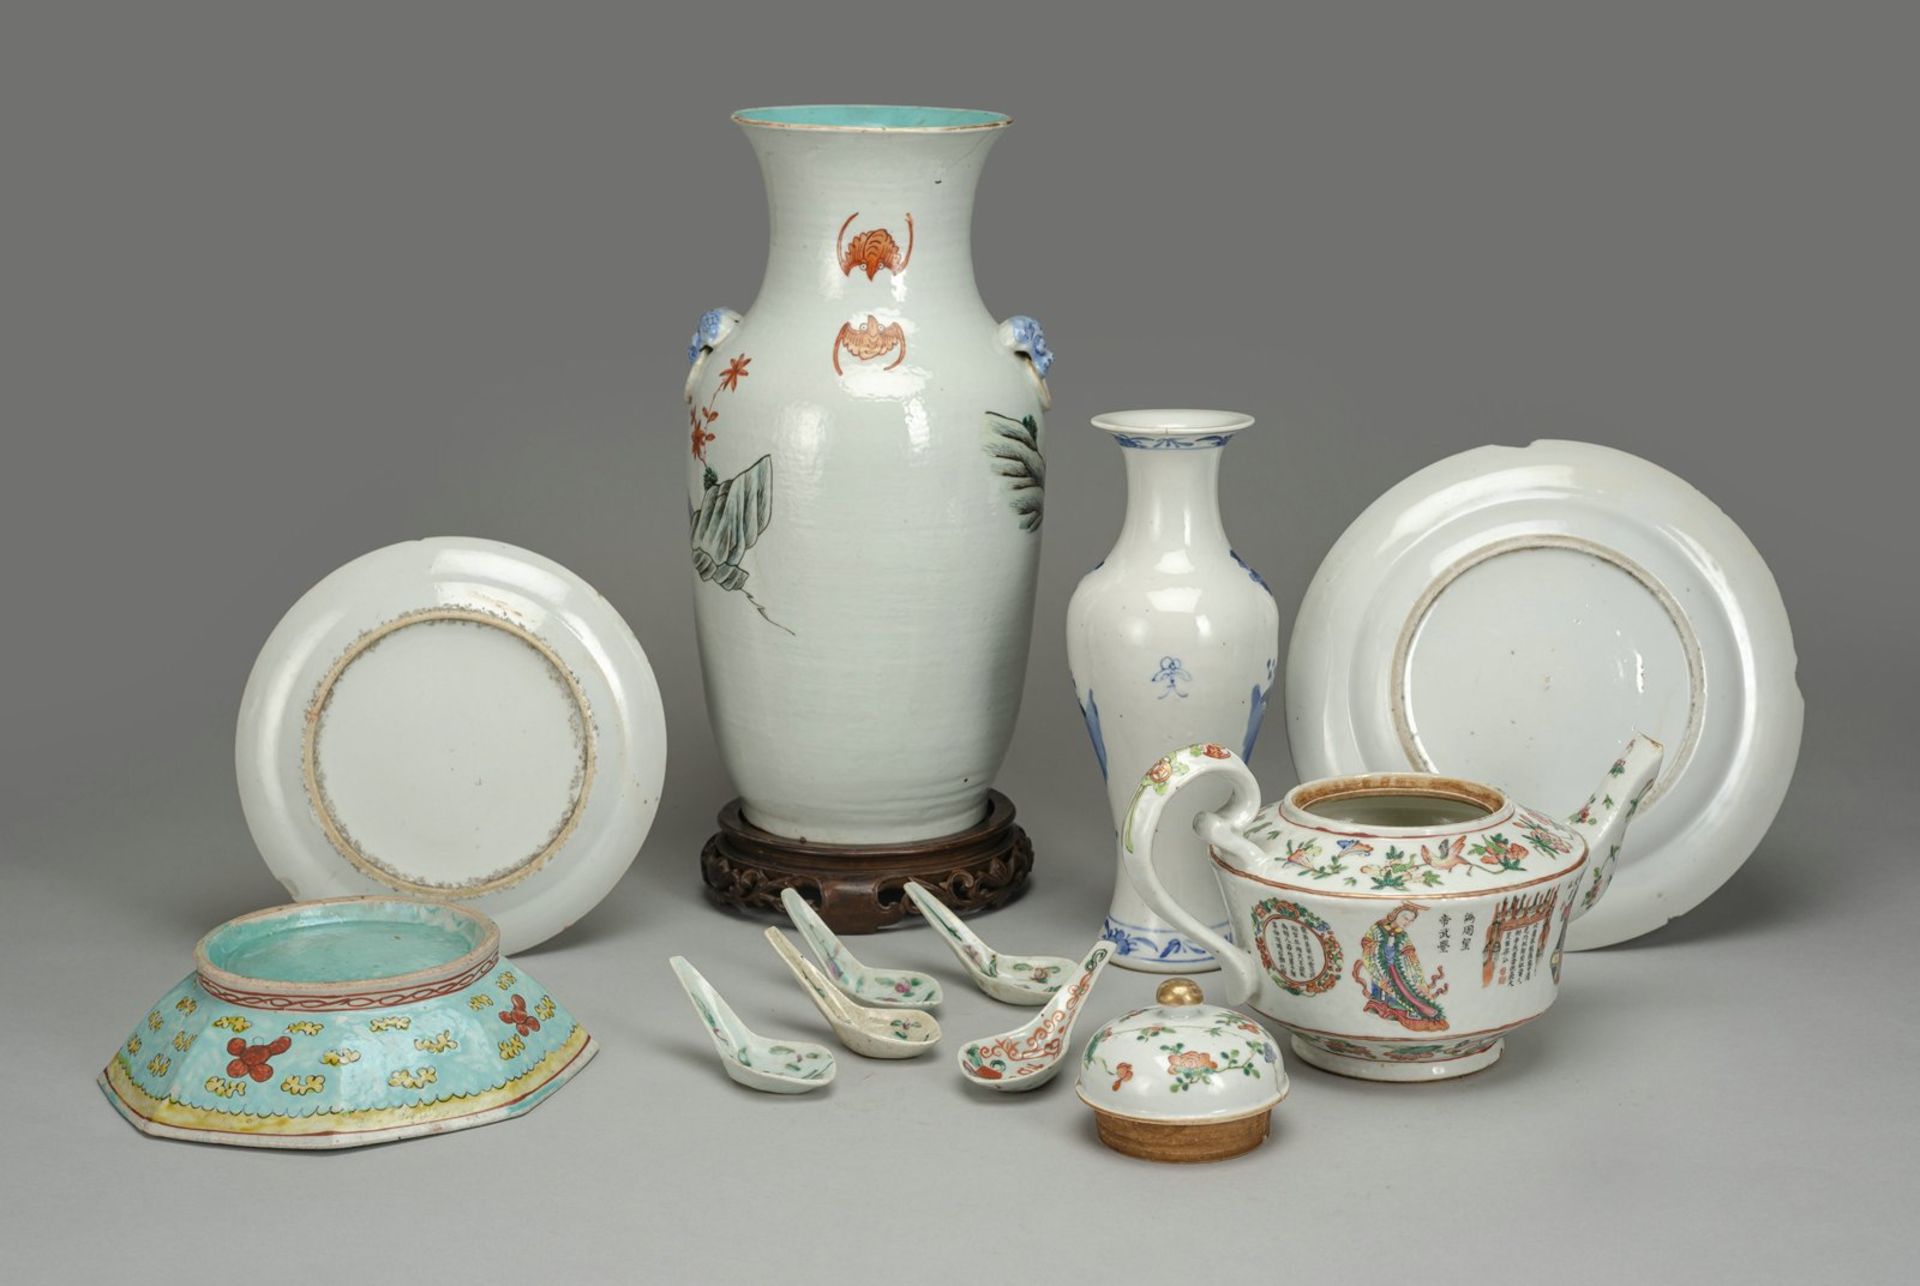 A GROUP OF 11 PORCELAIN PIECES, VASES, SPOONS AND OTHERS - Image 2 of 2